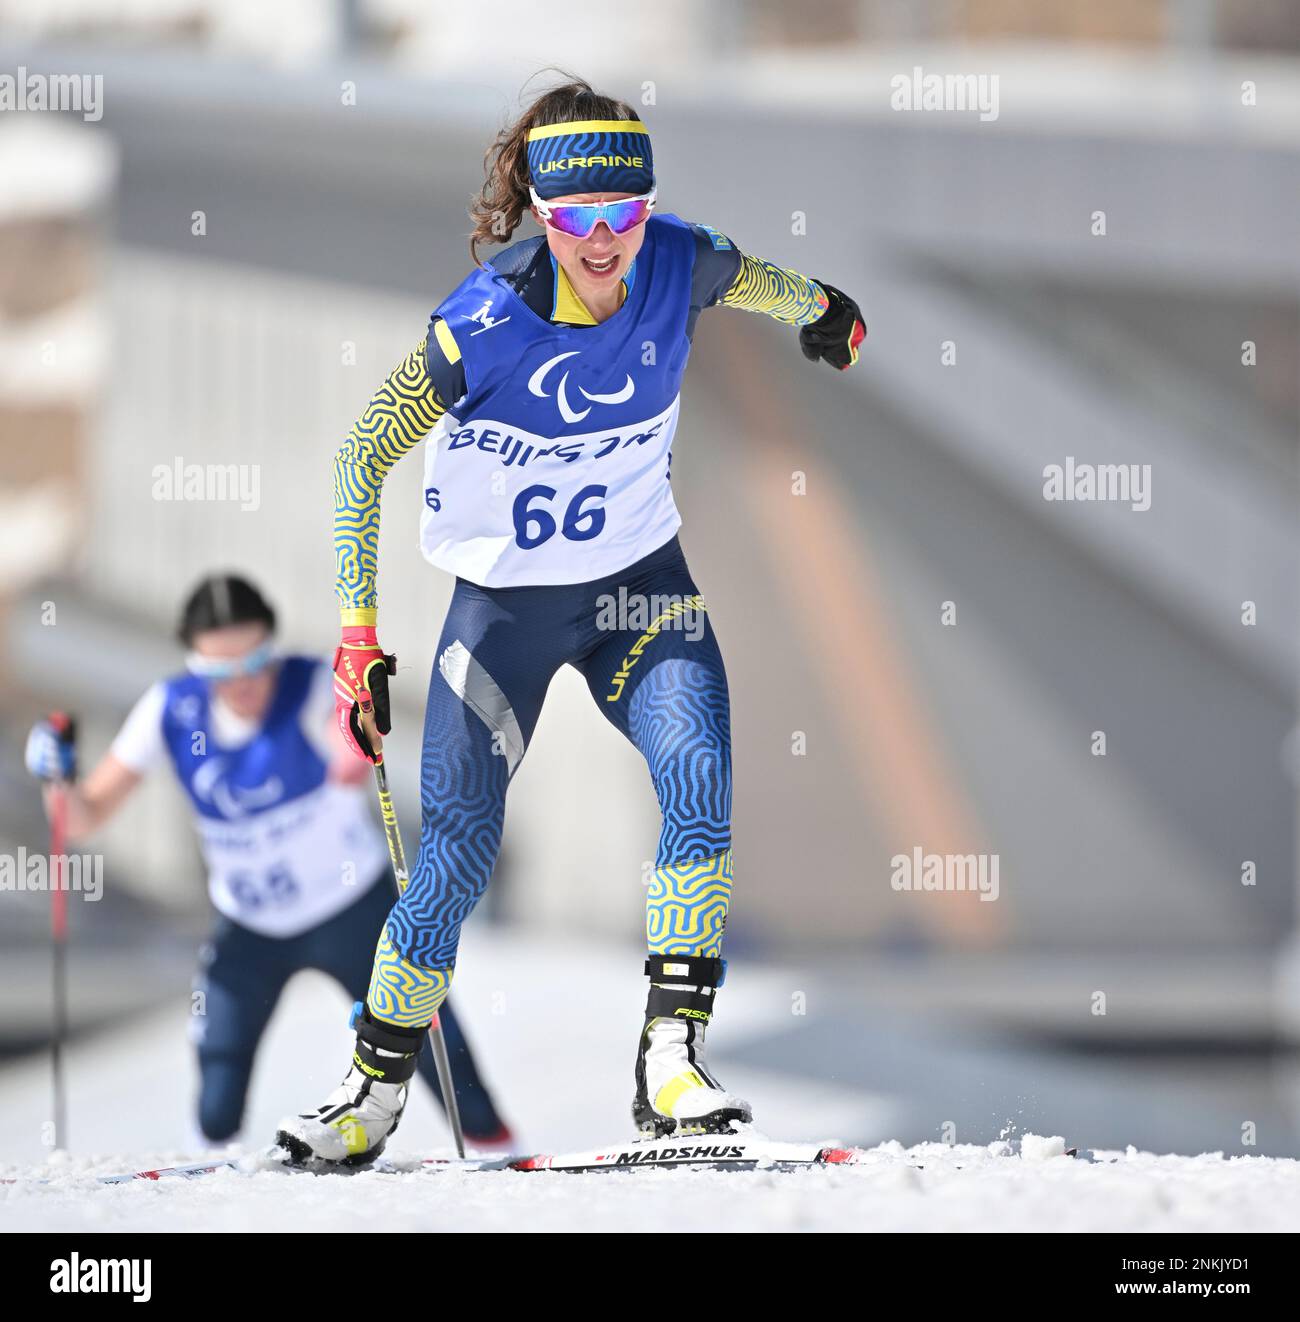 Ukraines BUI Iryna competes during the Womens Middle Distance Free Technique Standing at Zhangjiakou National Biathlon Center in Zhangjiakou, China on March 12, 2022